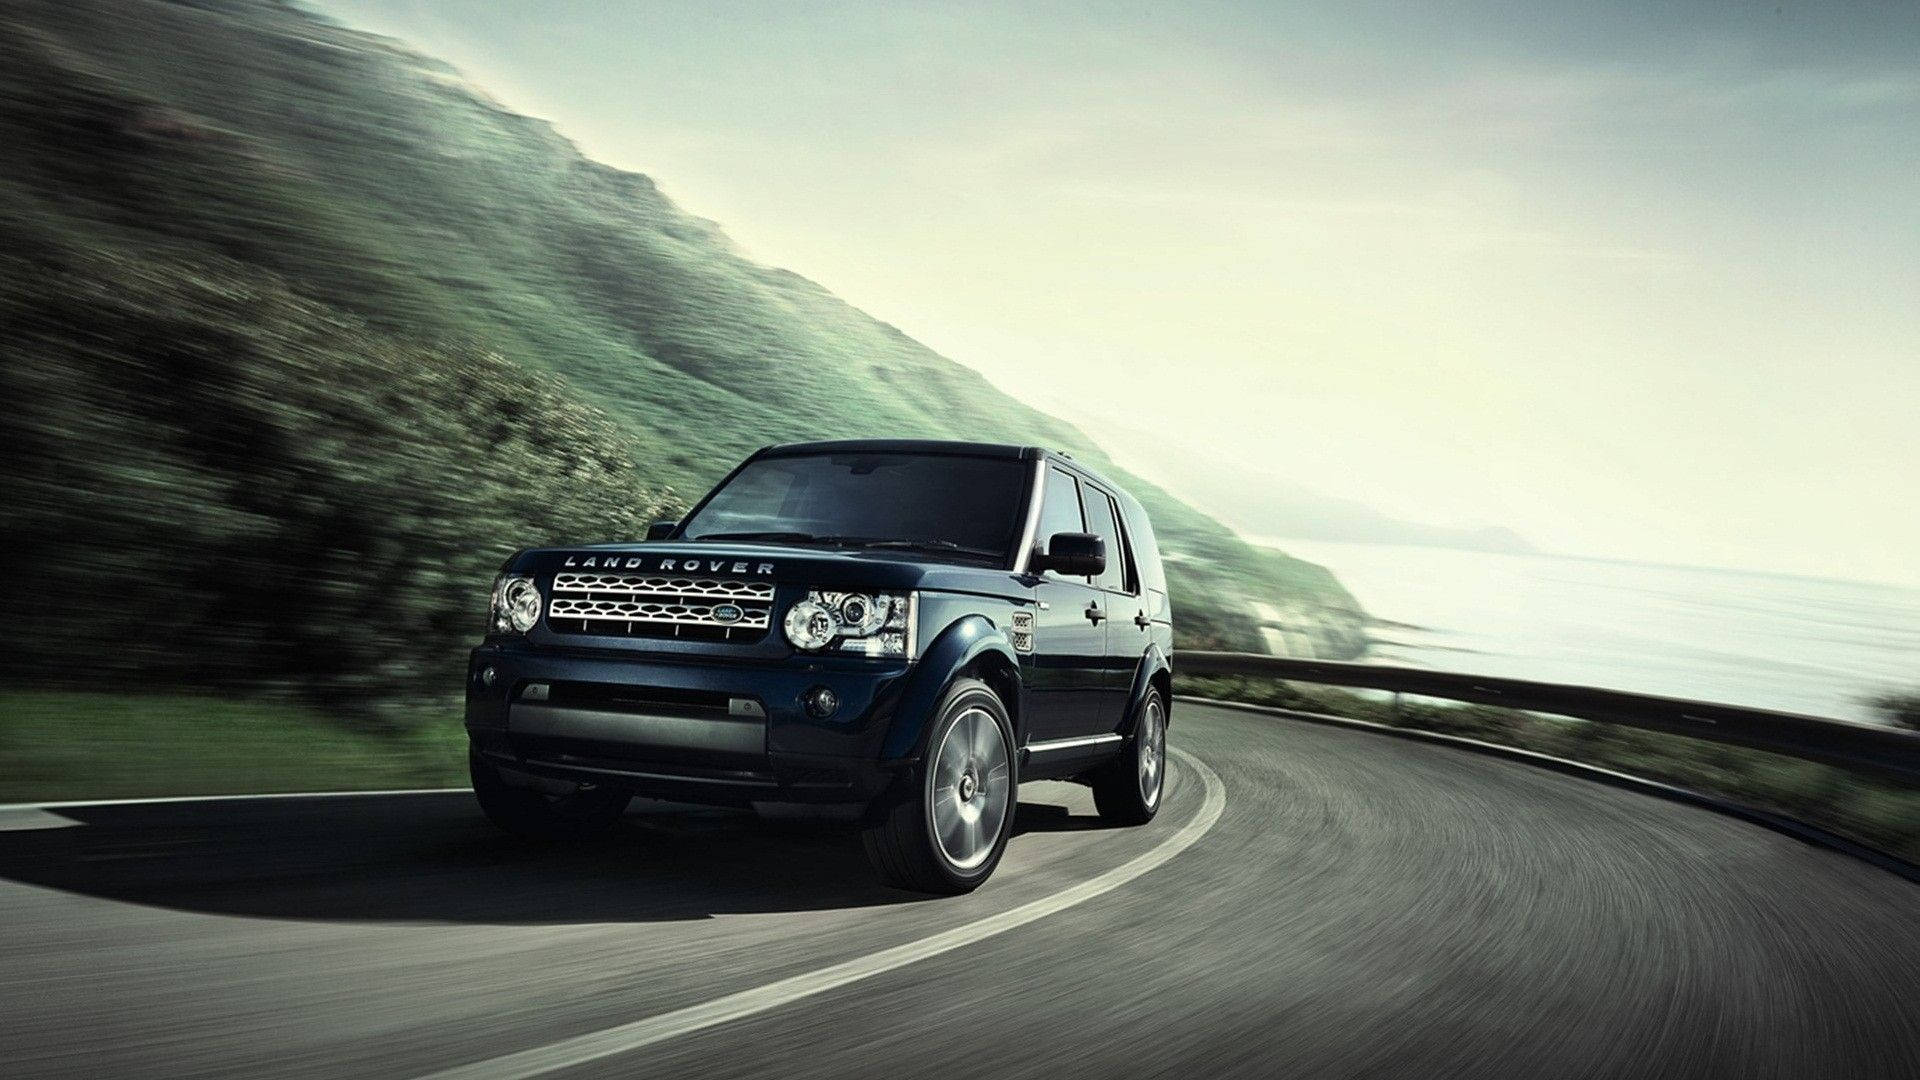 Free Land Rover Wallpaper Downloads, [100+] Land Rover Wallpapers for FREE  